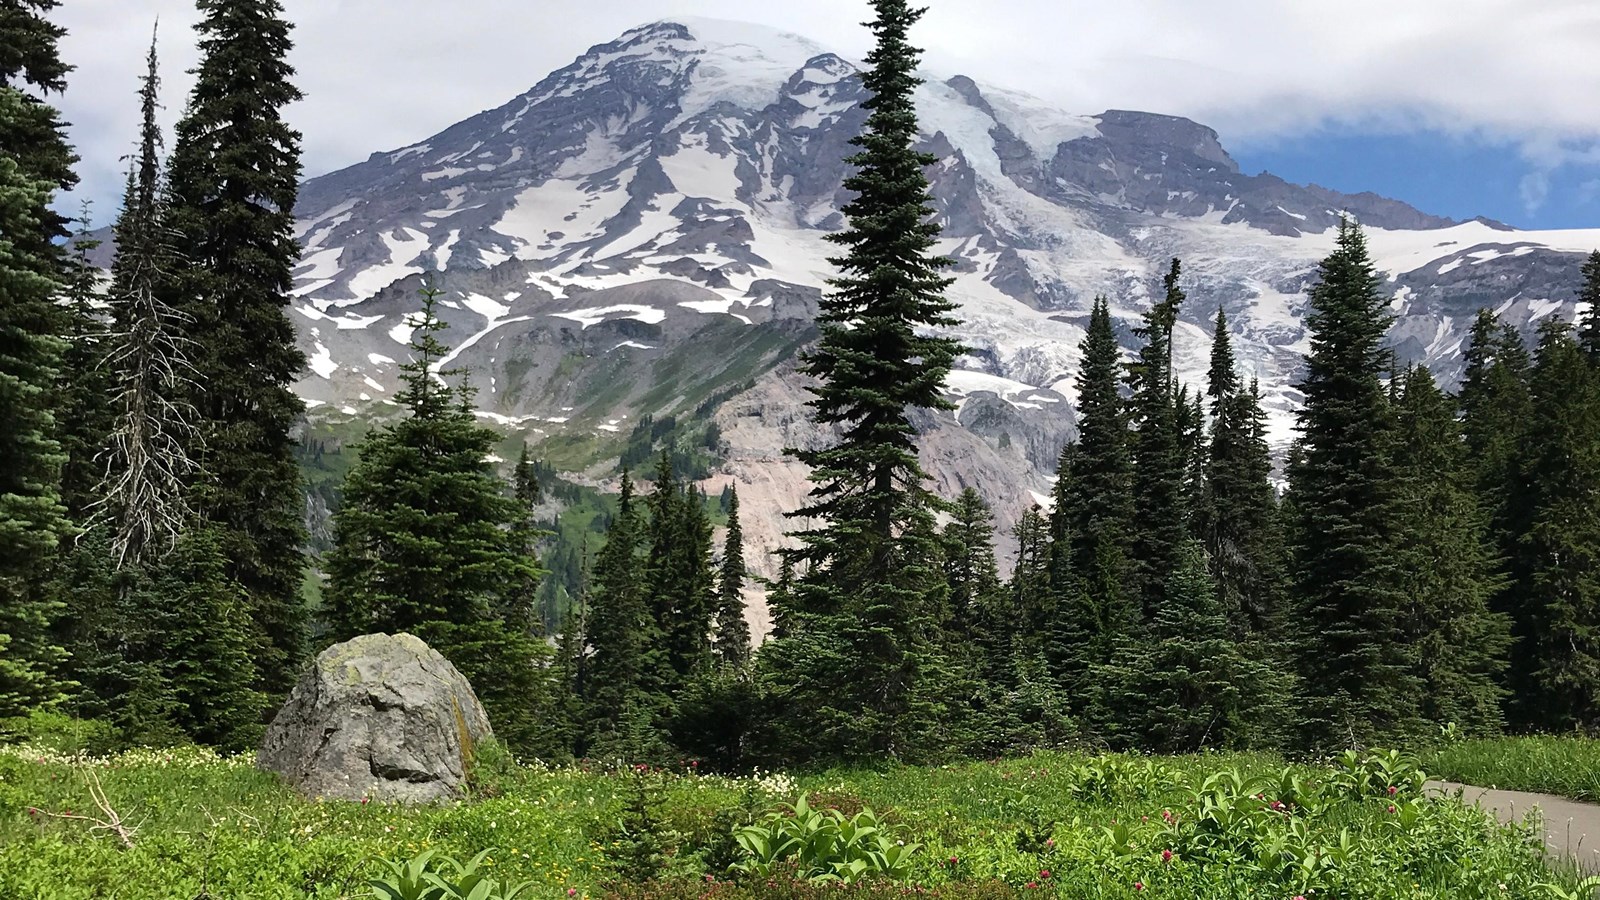 A meadow of lush plants with a large boulder framed by fir trees underneath a glaciated mountain.